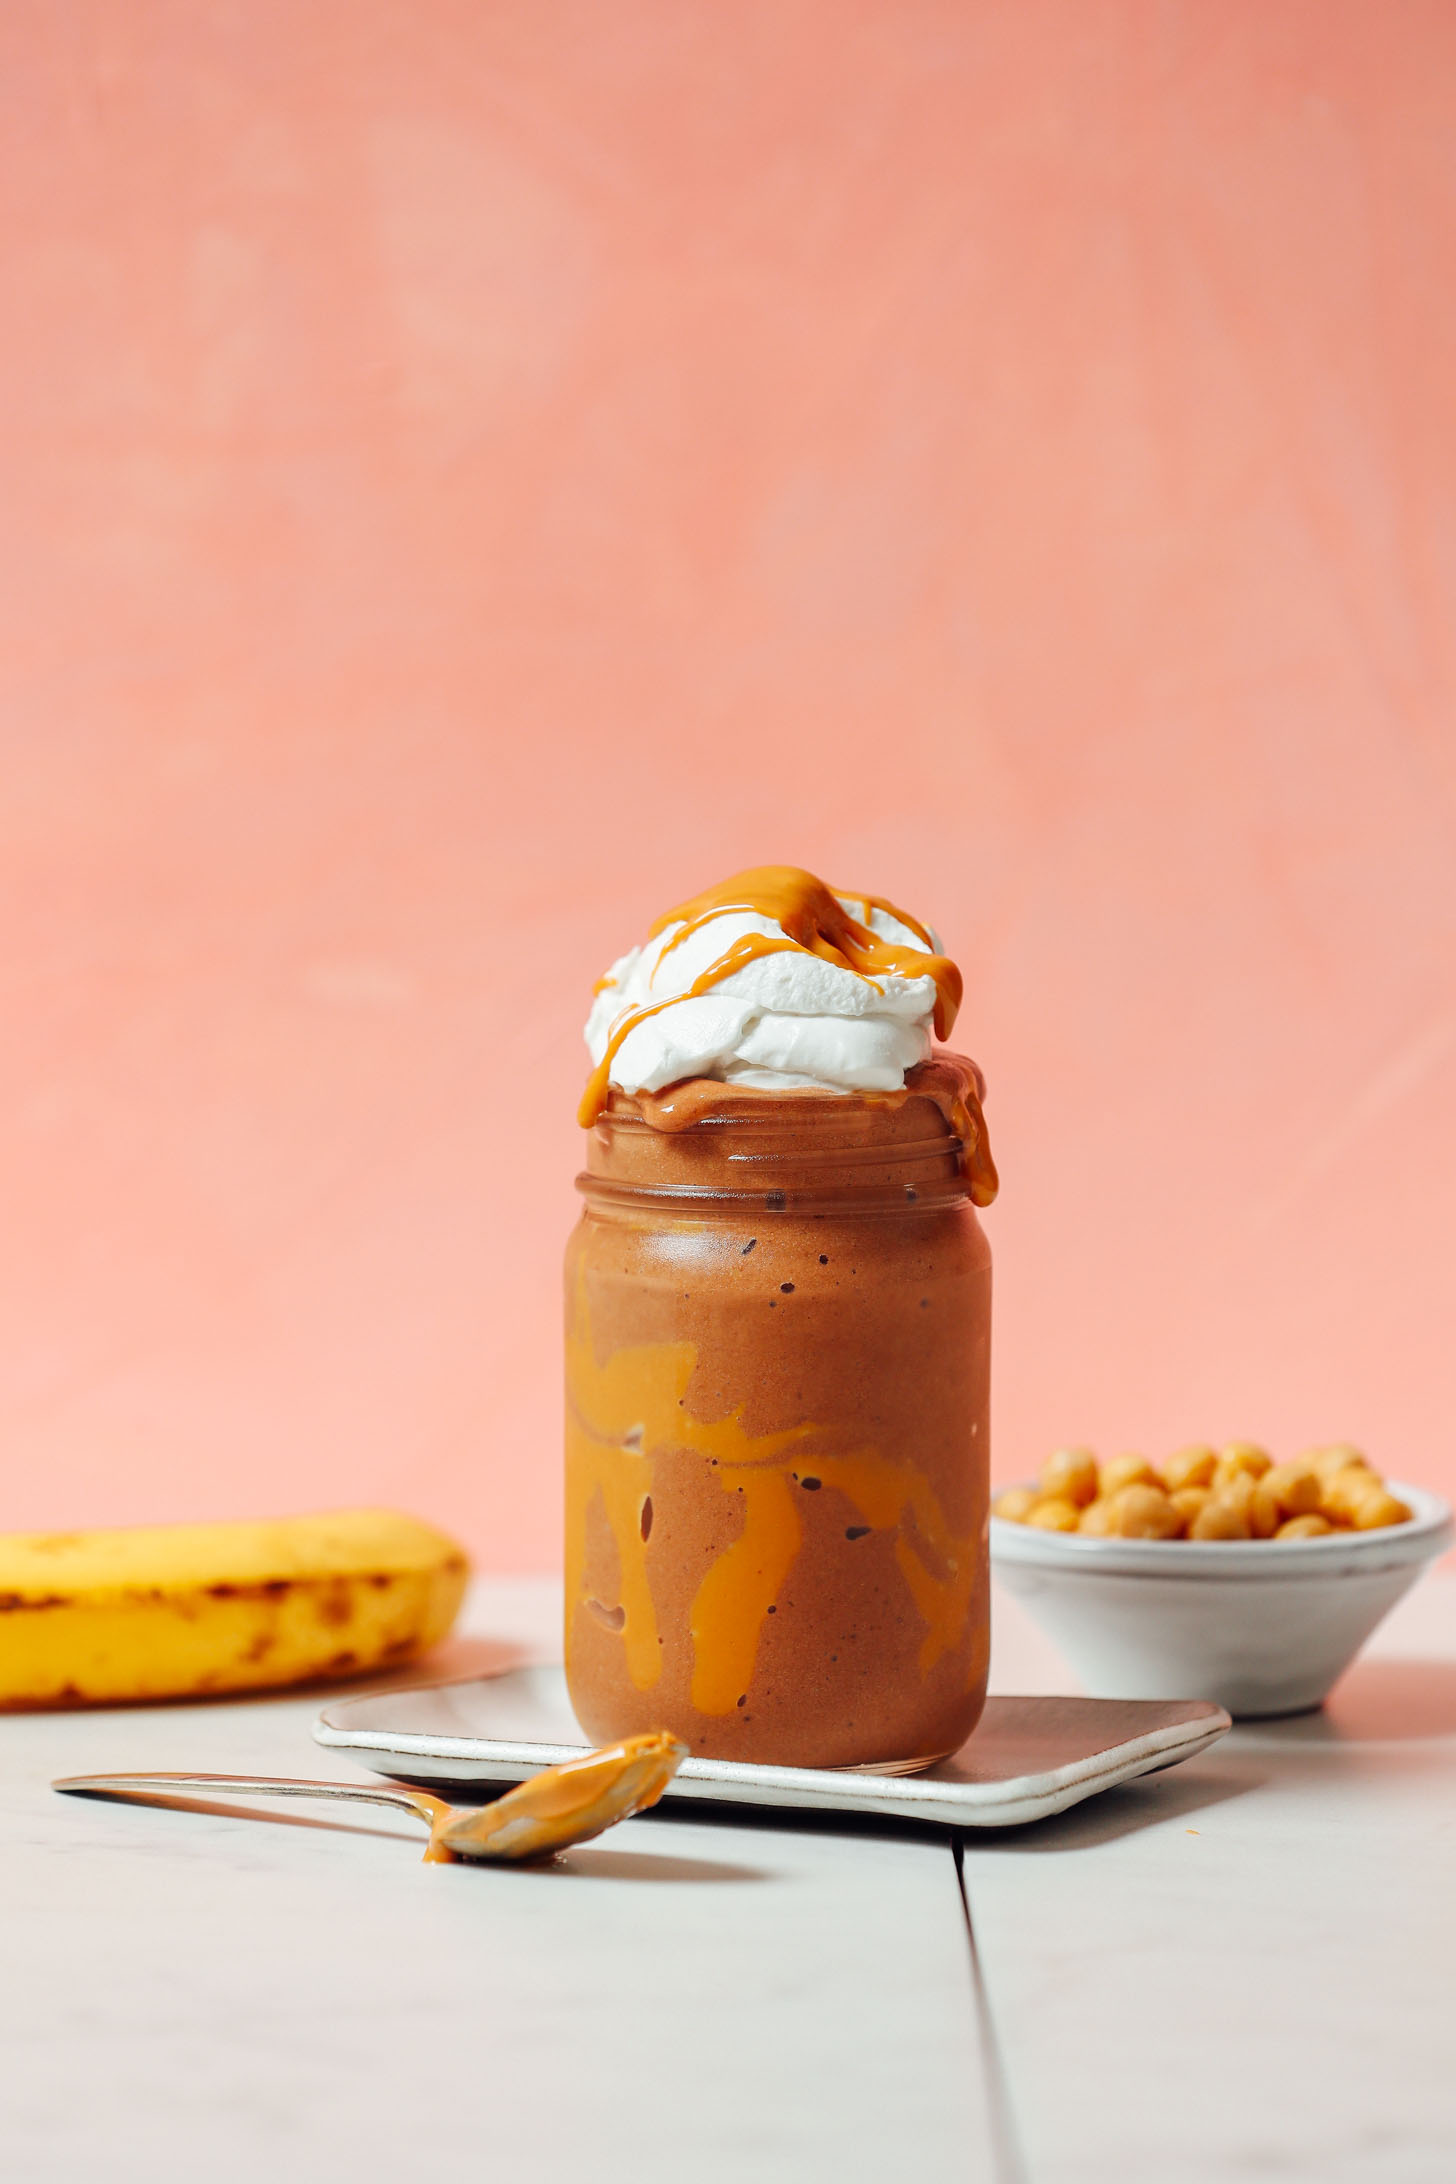 Glass jar filled with our Peanut Butter Chocolate Shake made with chickpeas